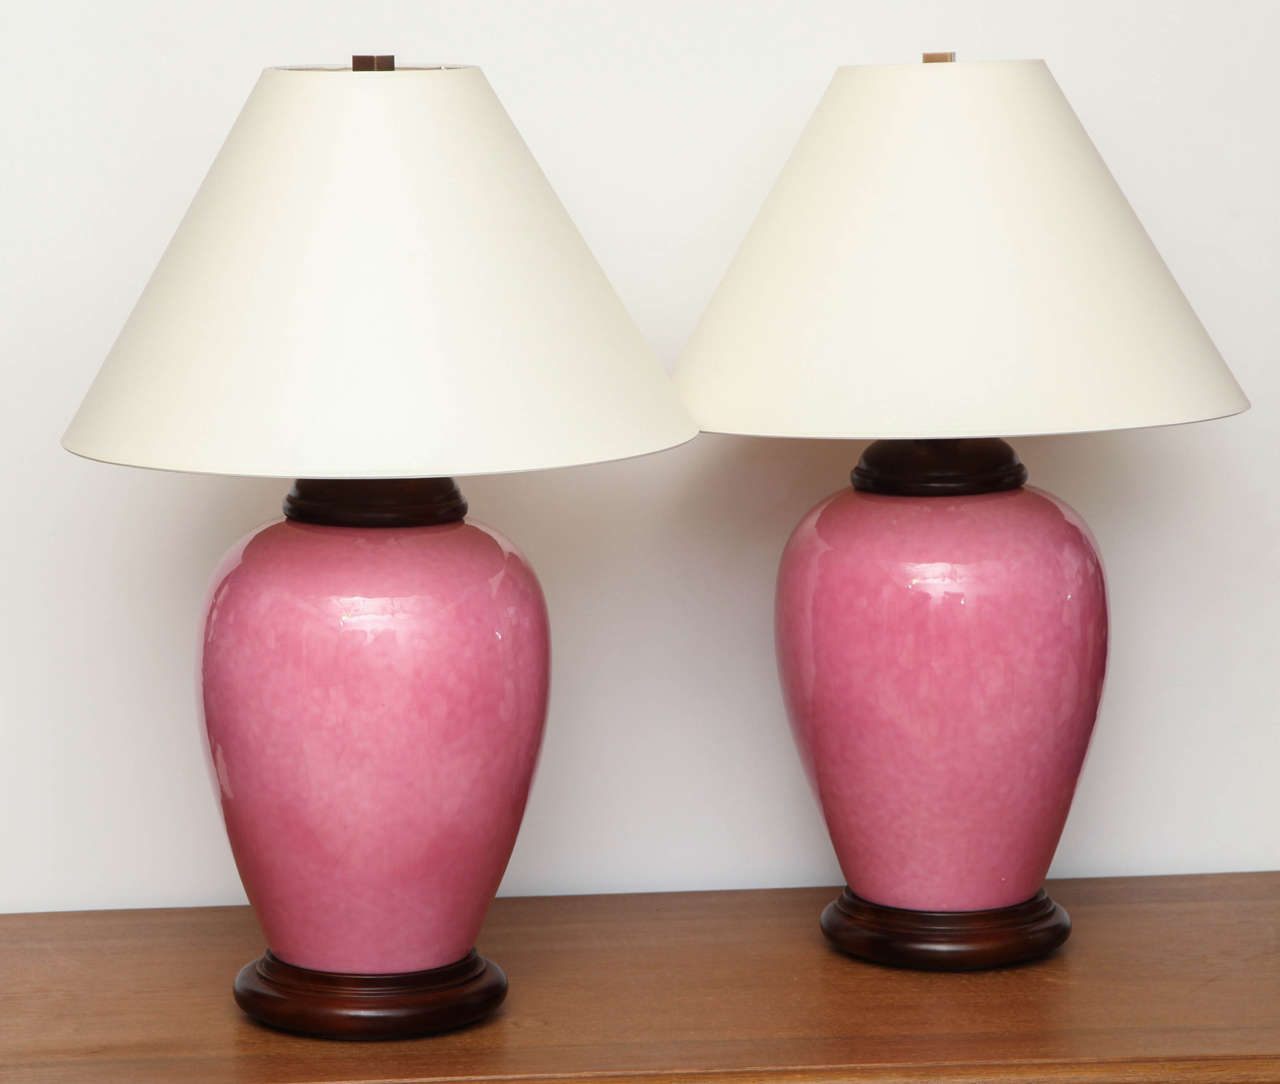 Pair of rose colored ceramic urn shaped lamps with wood base and cap. Shades not included.